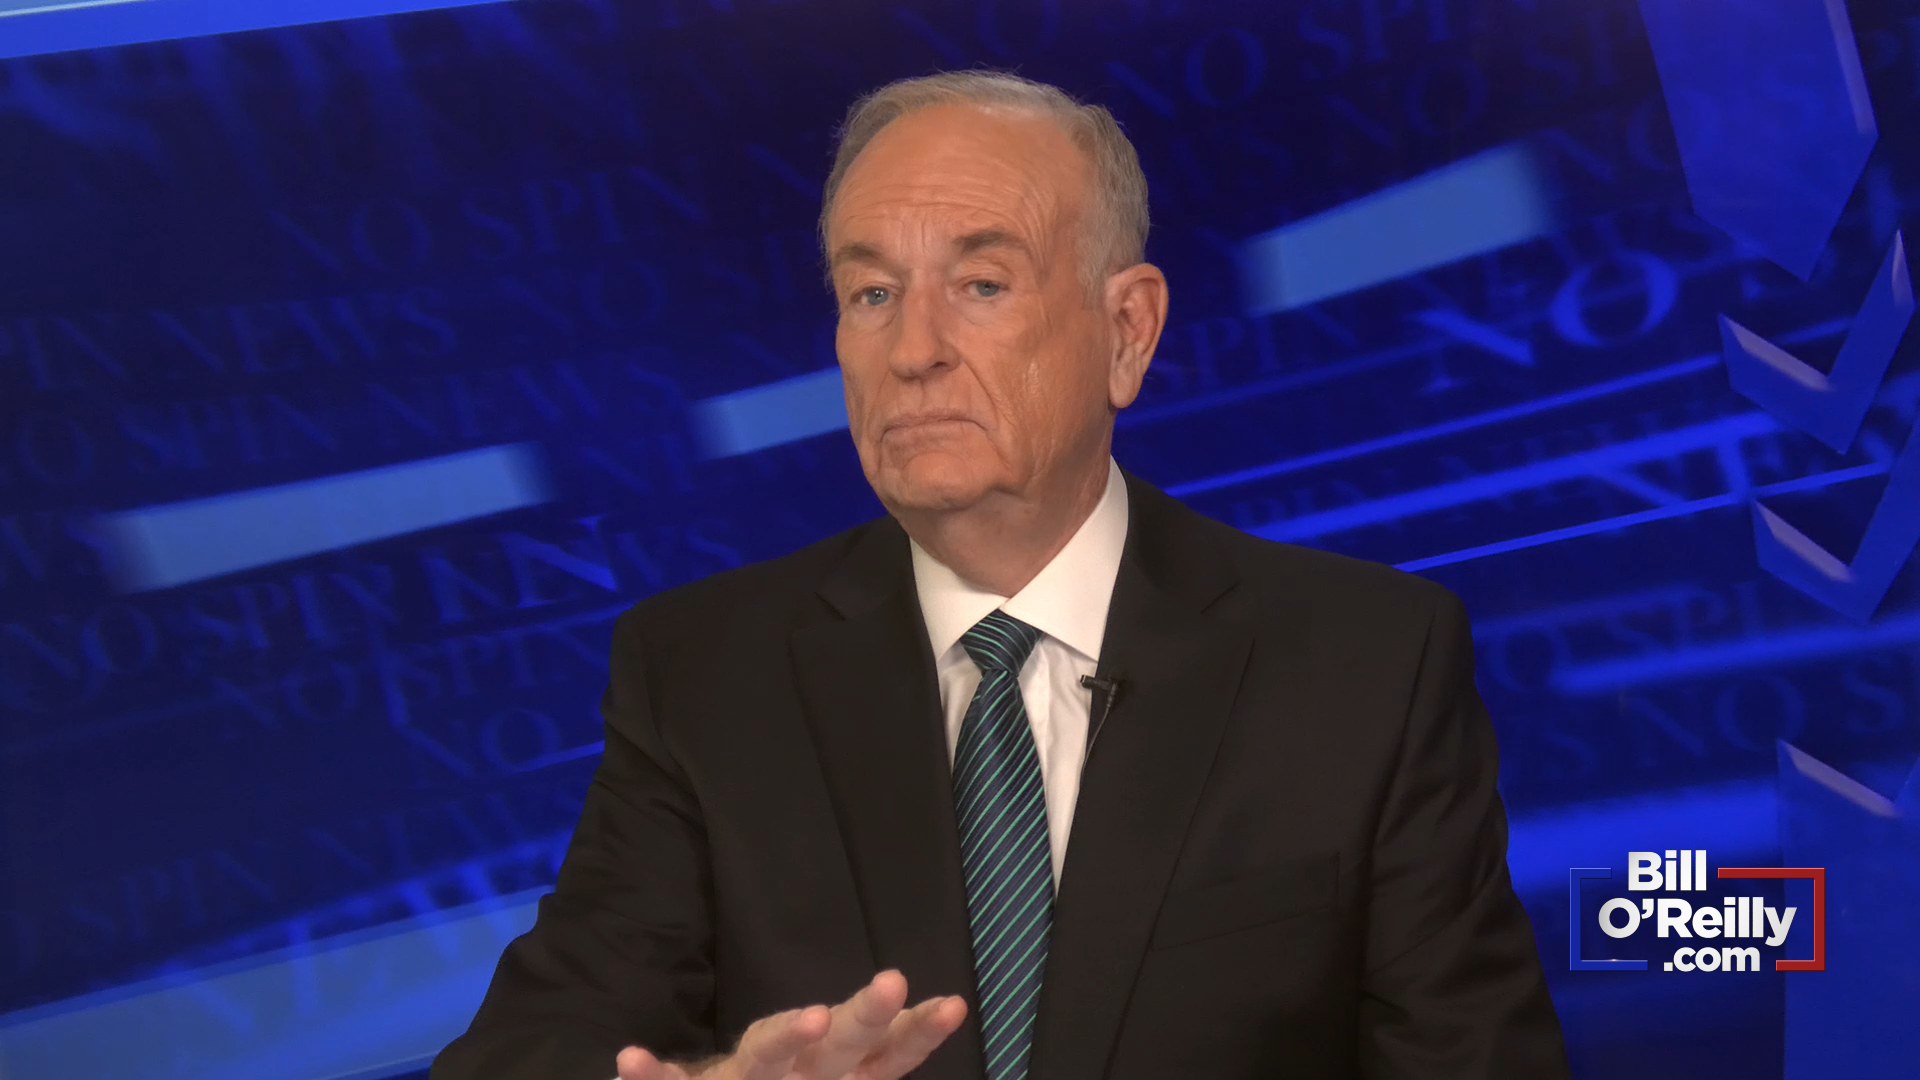 O'Reilly: 'The Progressive Movement is on the Skids'